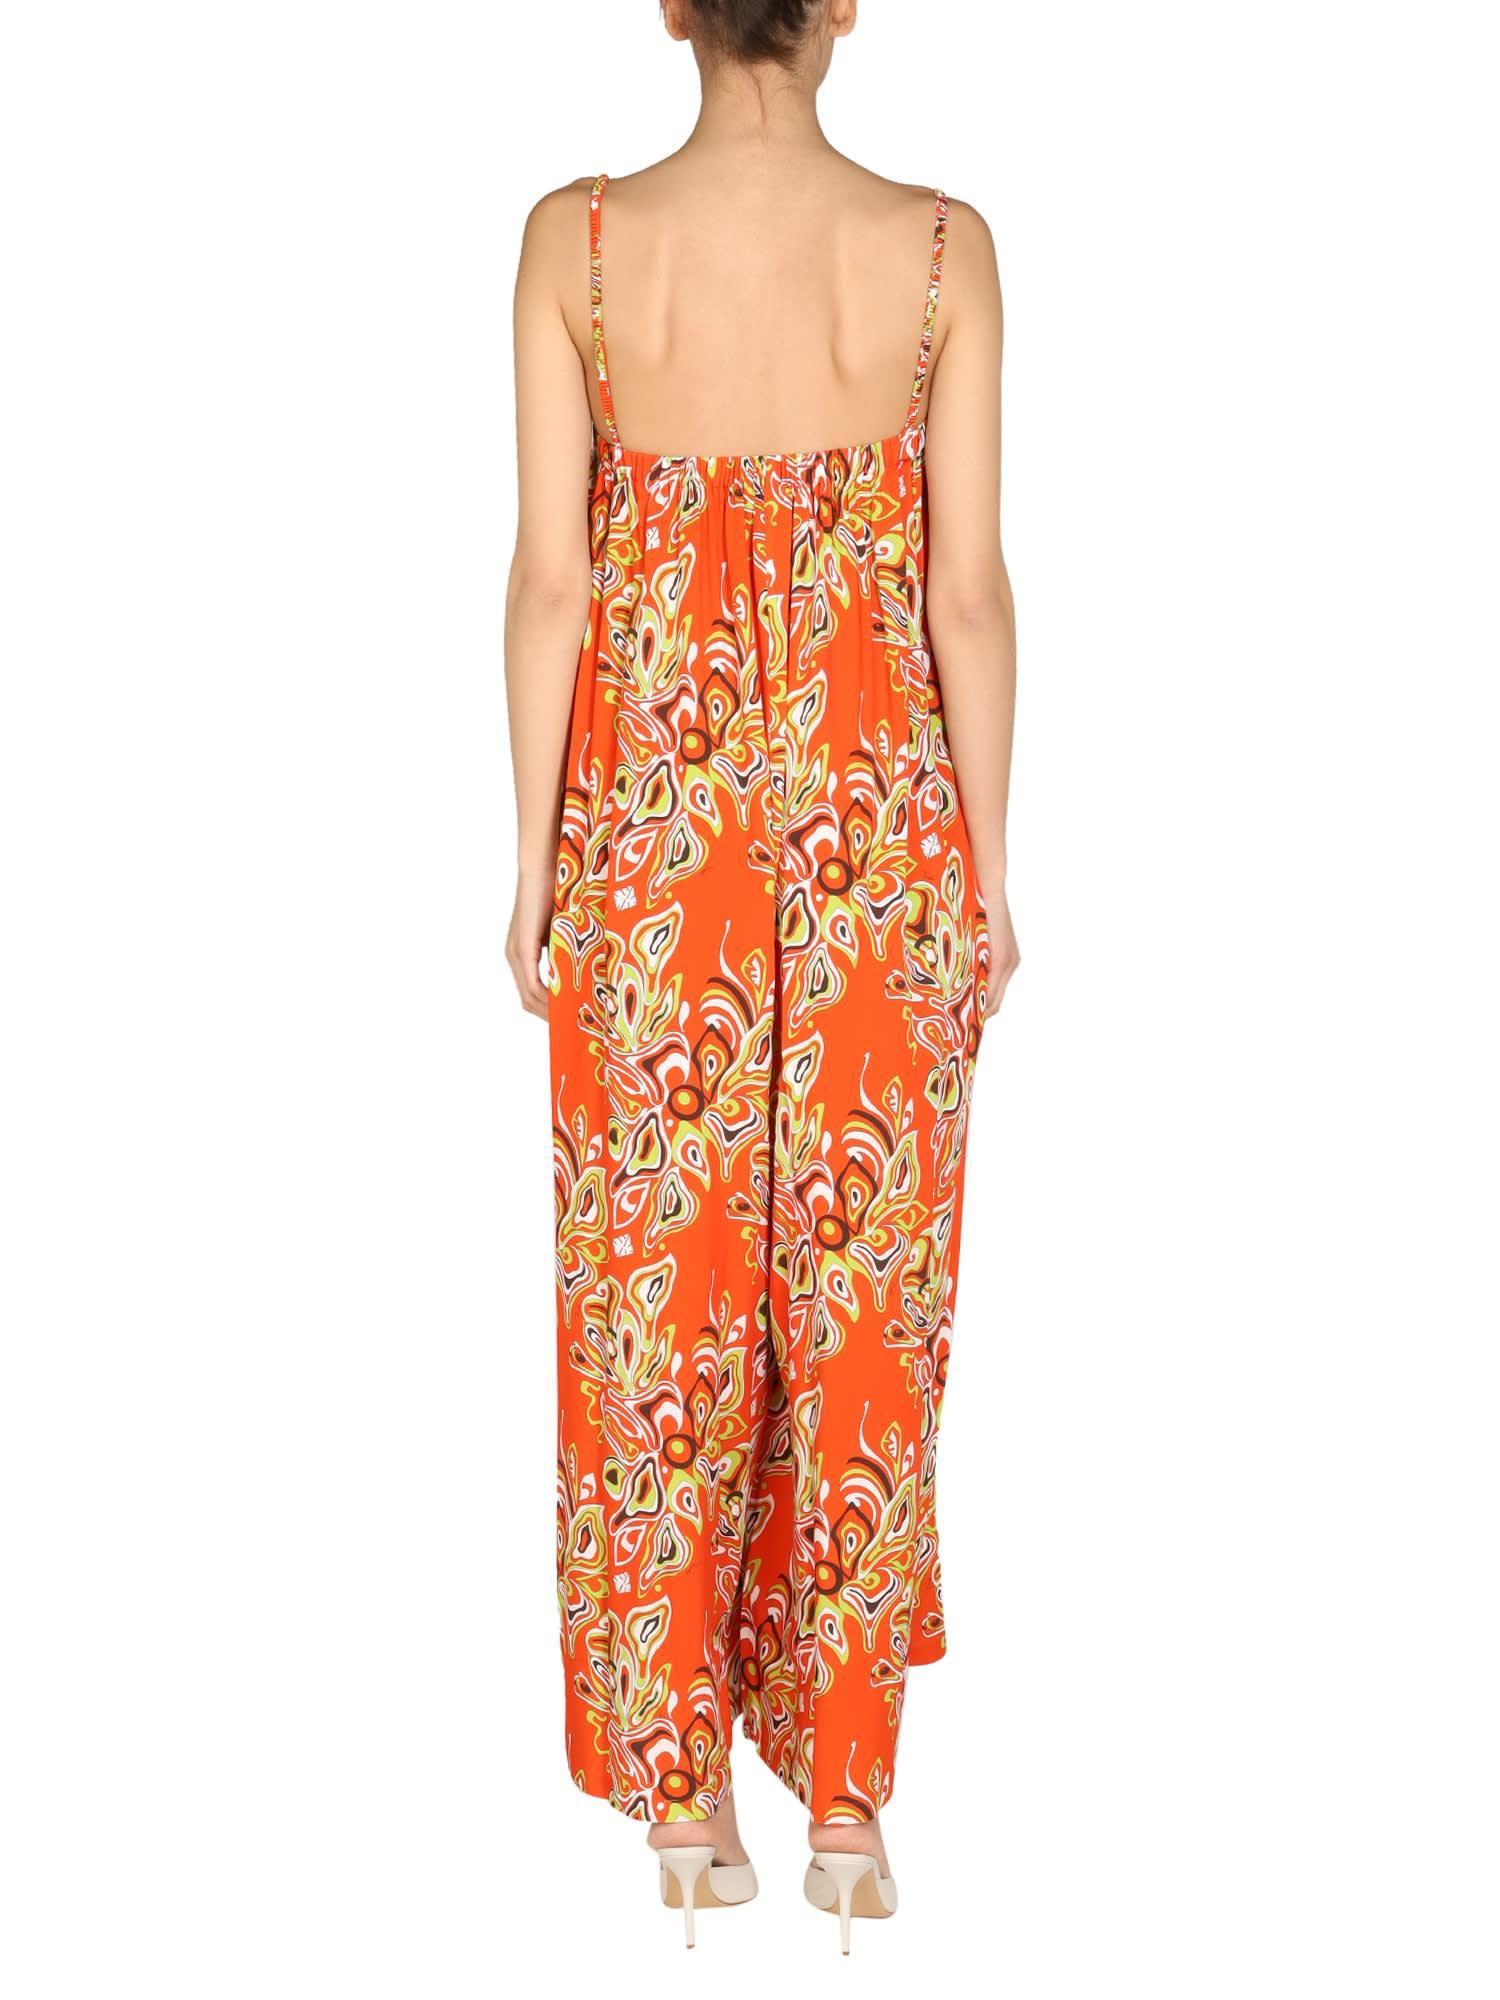 Emilio Pucci Synthetic African Print Dress in Orange | Lyst